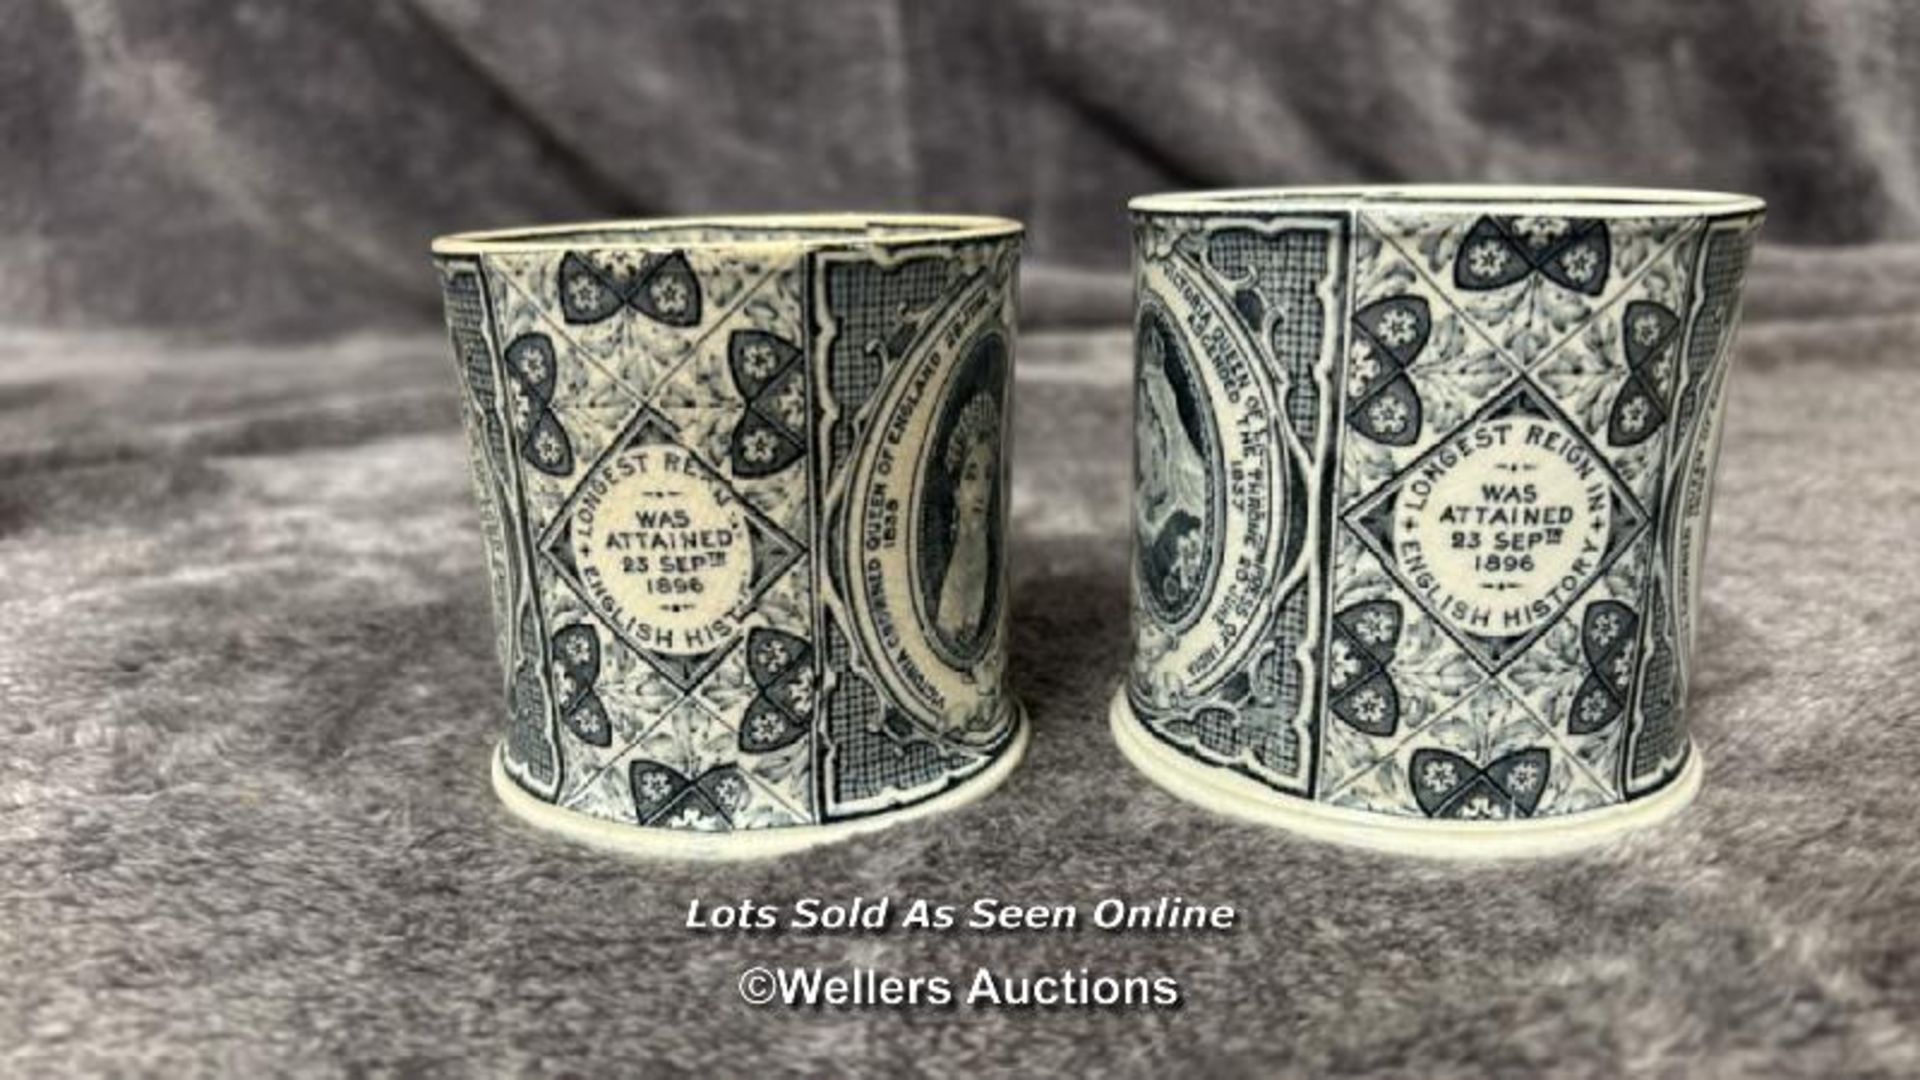 Two William Whiteley Queen Victoria longest reign mugs with one Royal Doulton King Edward VII mug - Image 3 of 10